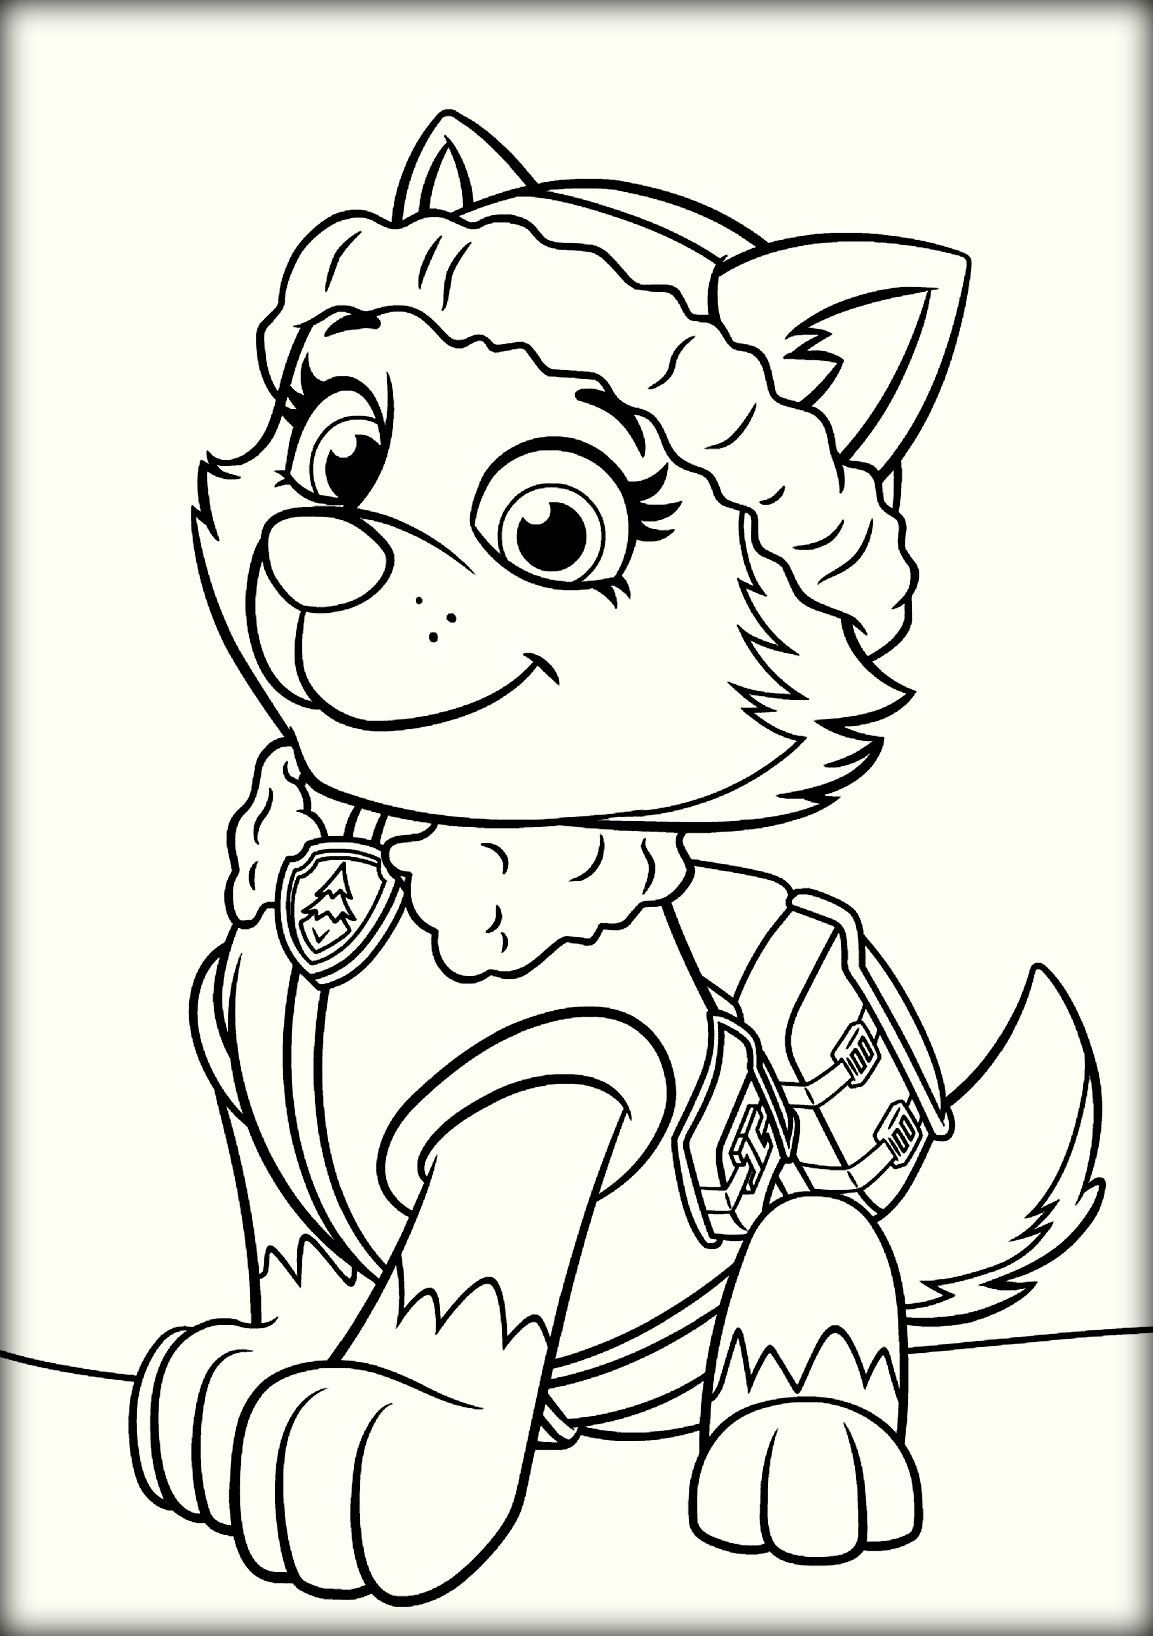 Puppy Dog Pals Coloring Pages at GetColorings.com | Free printable